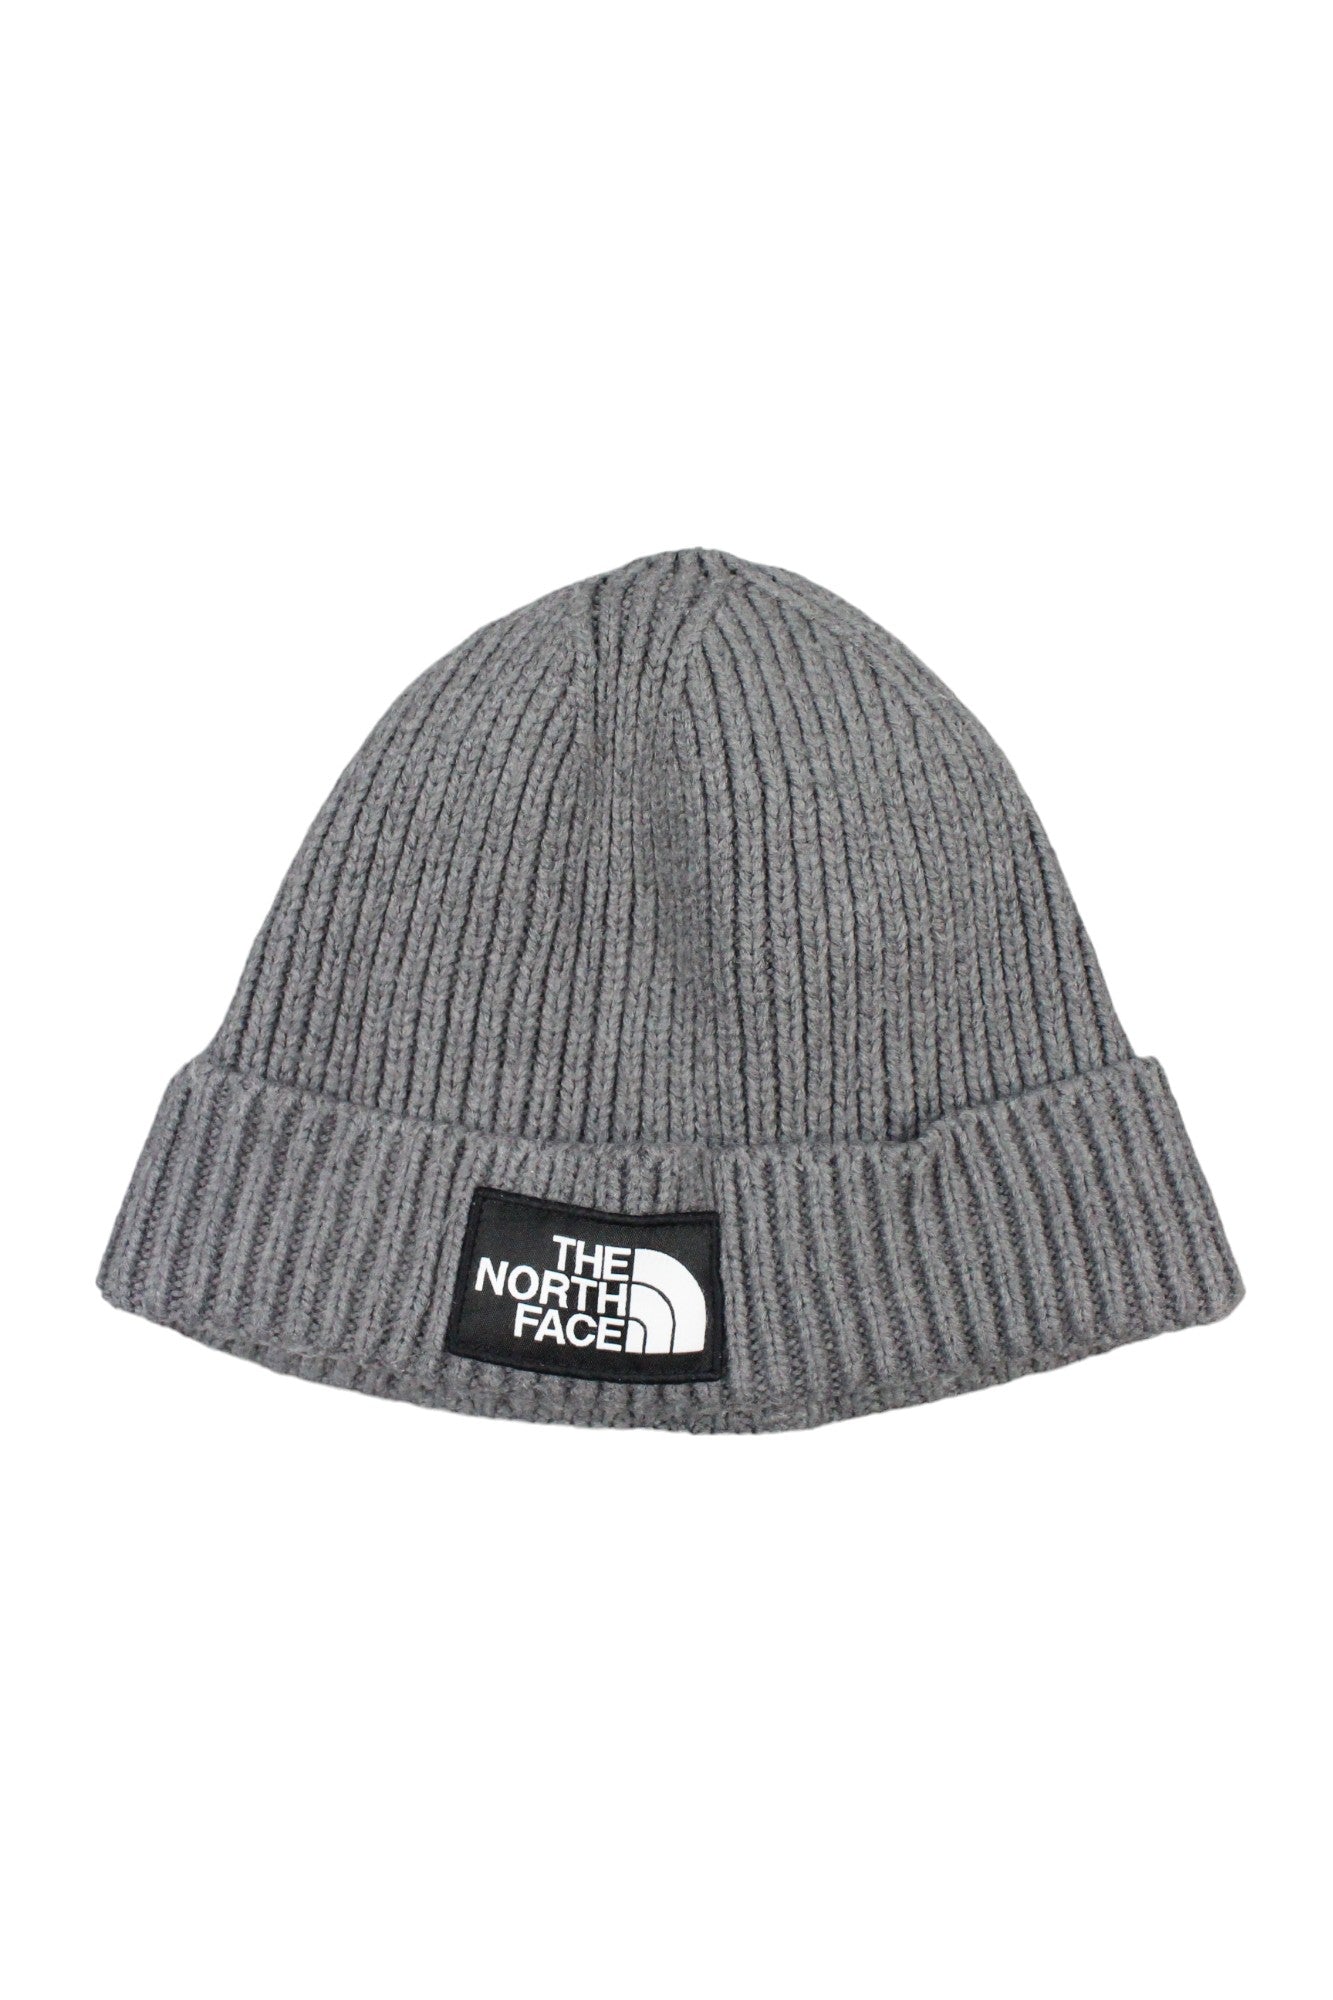 The North Face Grey Beanie